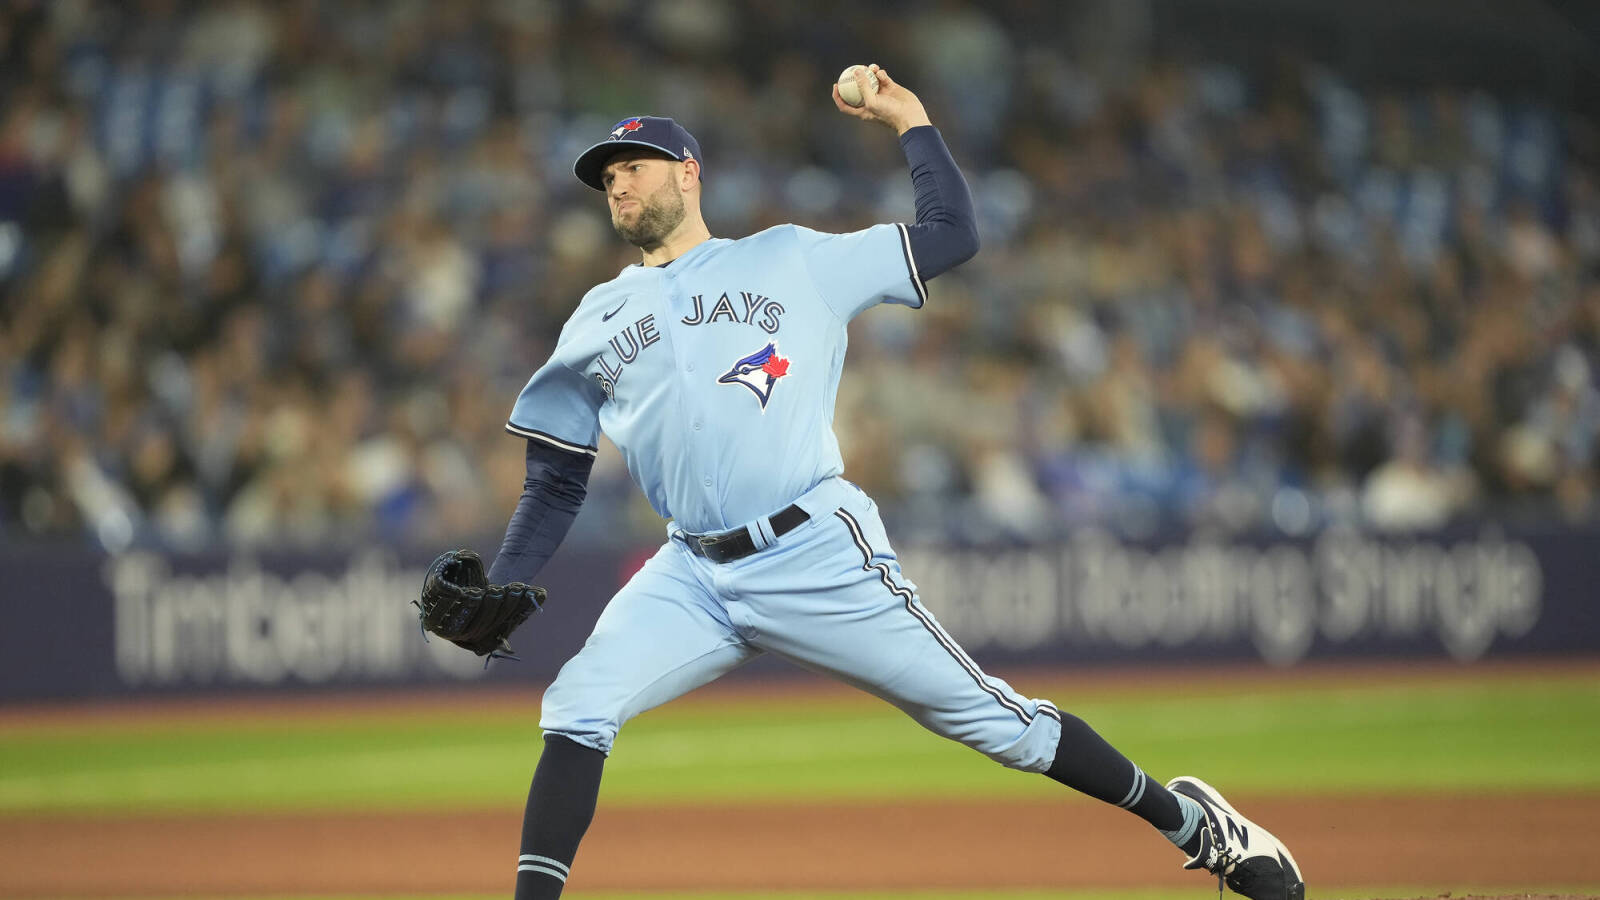 Watch: Blue Jays embarrass star relief pitcher over fantasy football record